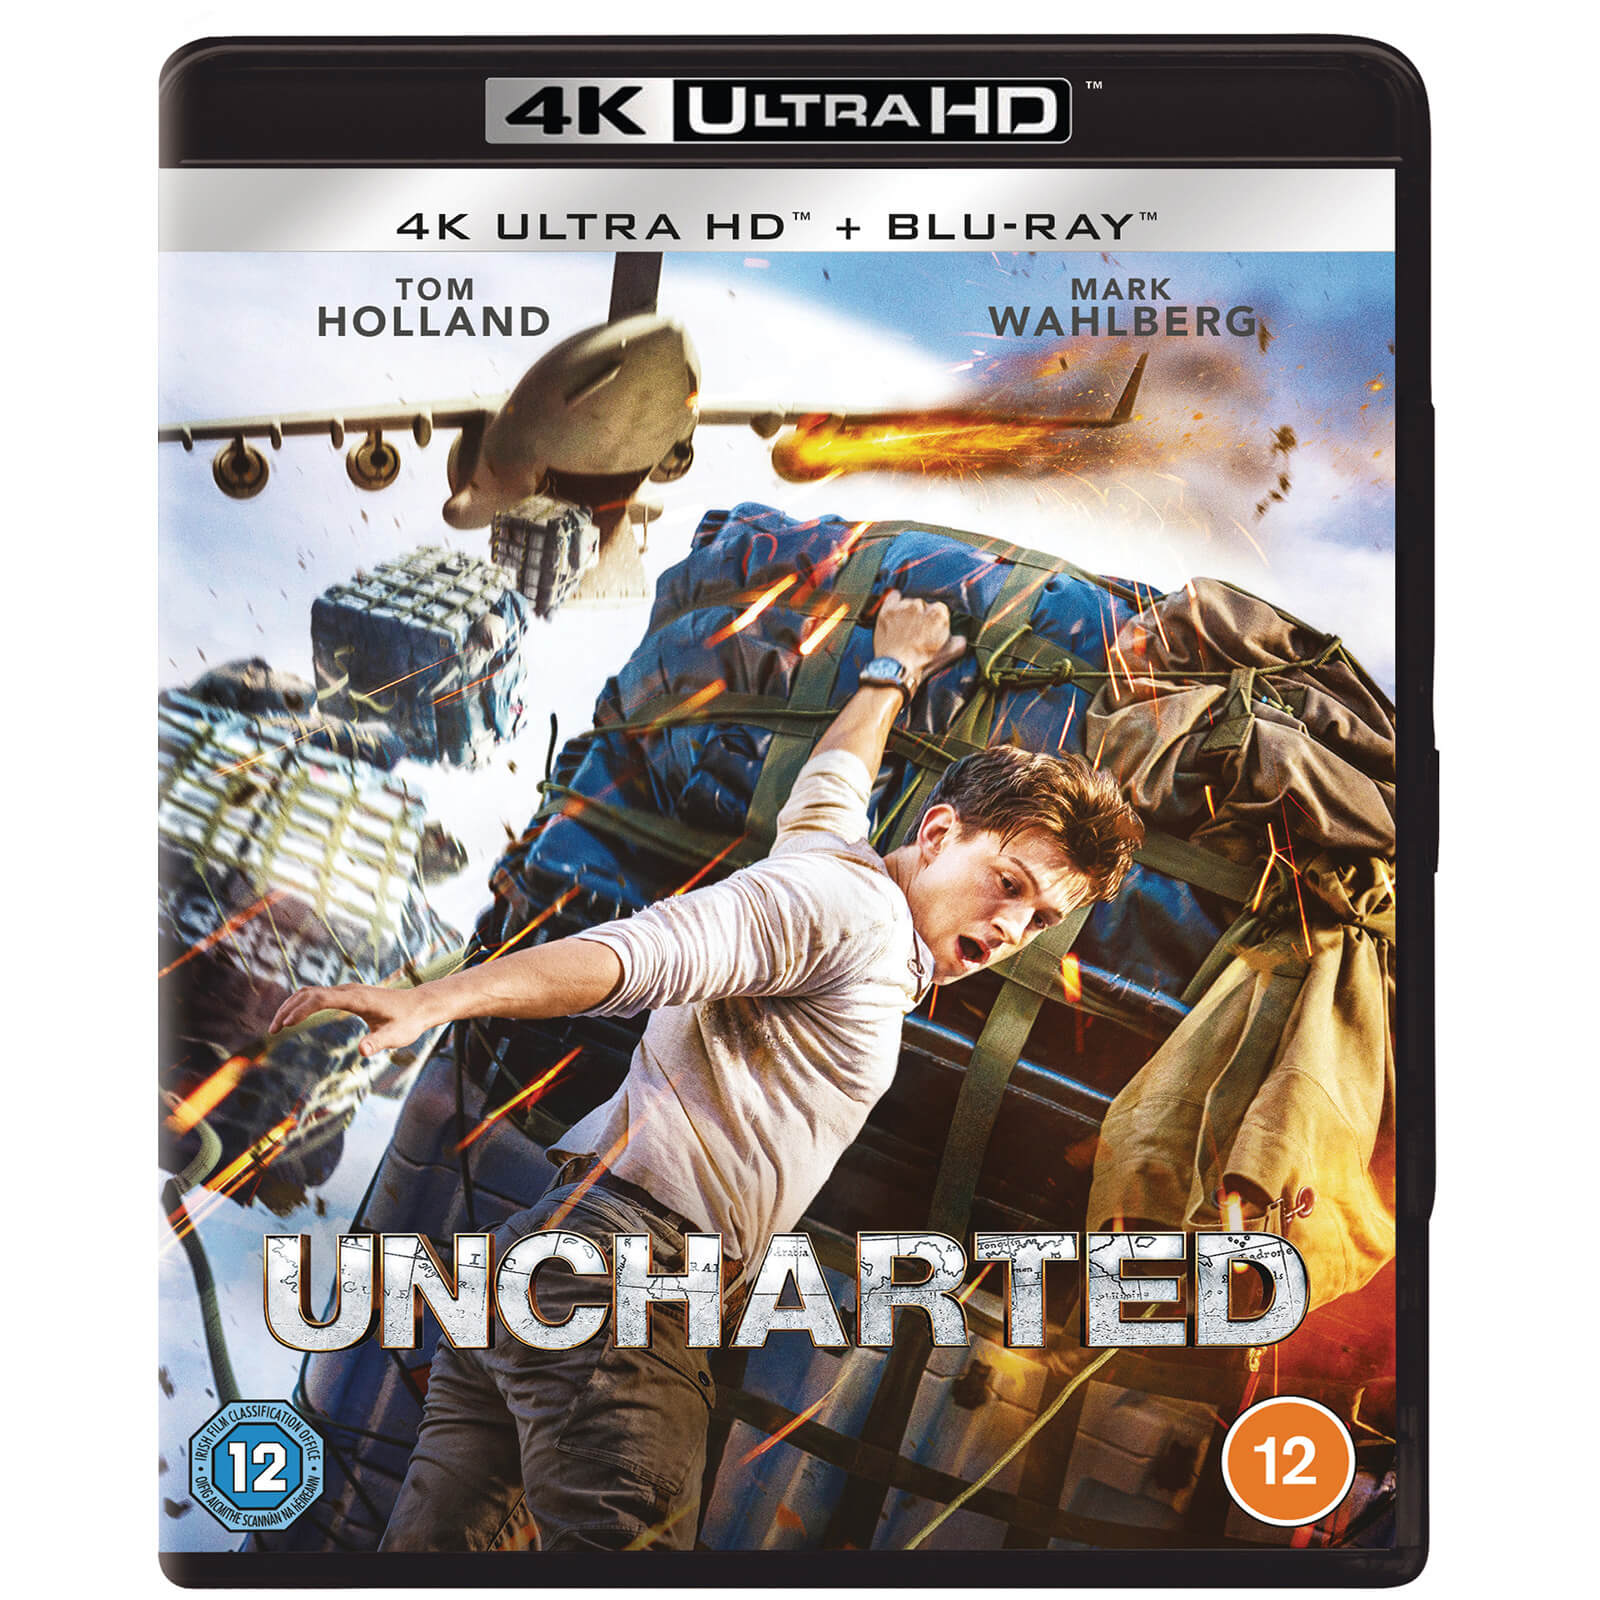 Image of Uncharted - 4K Ultra HD (Includes Blu-ray)